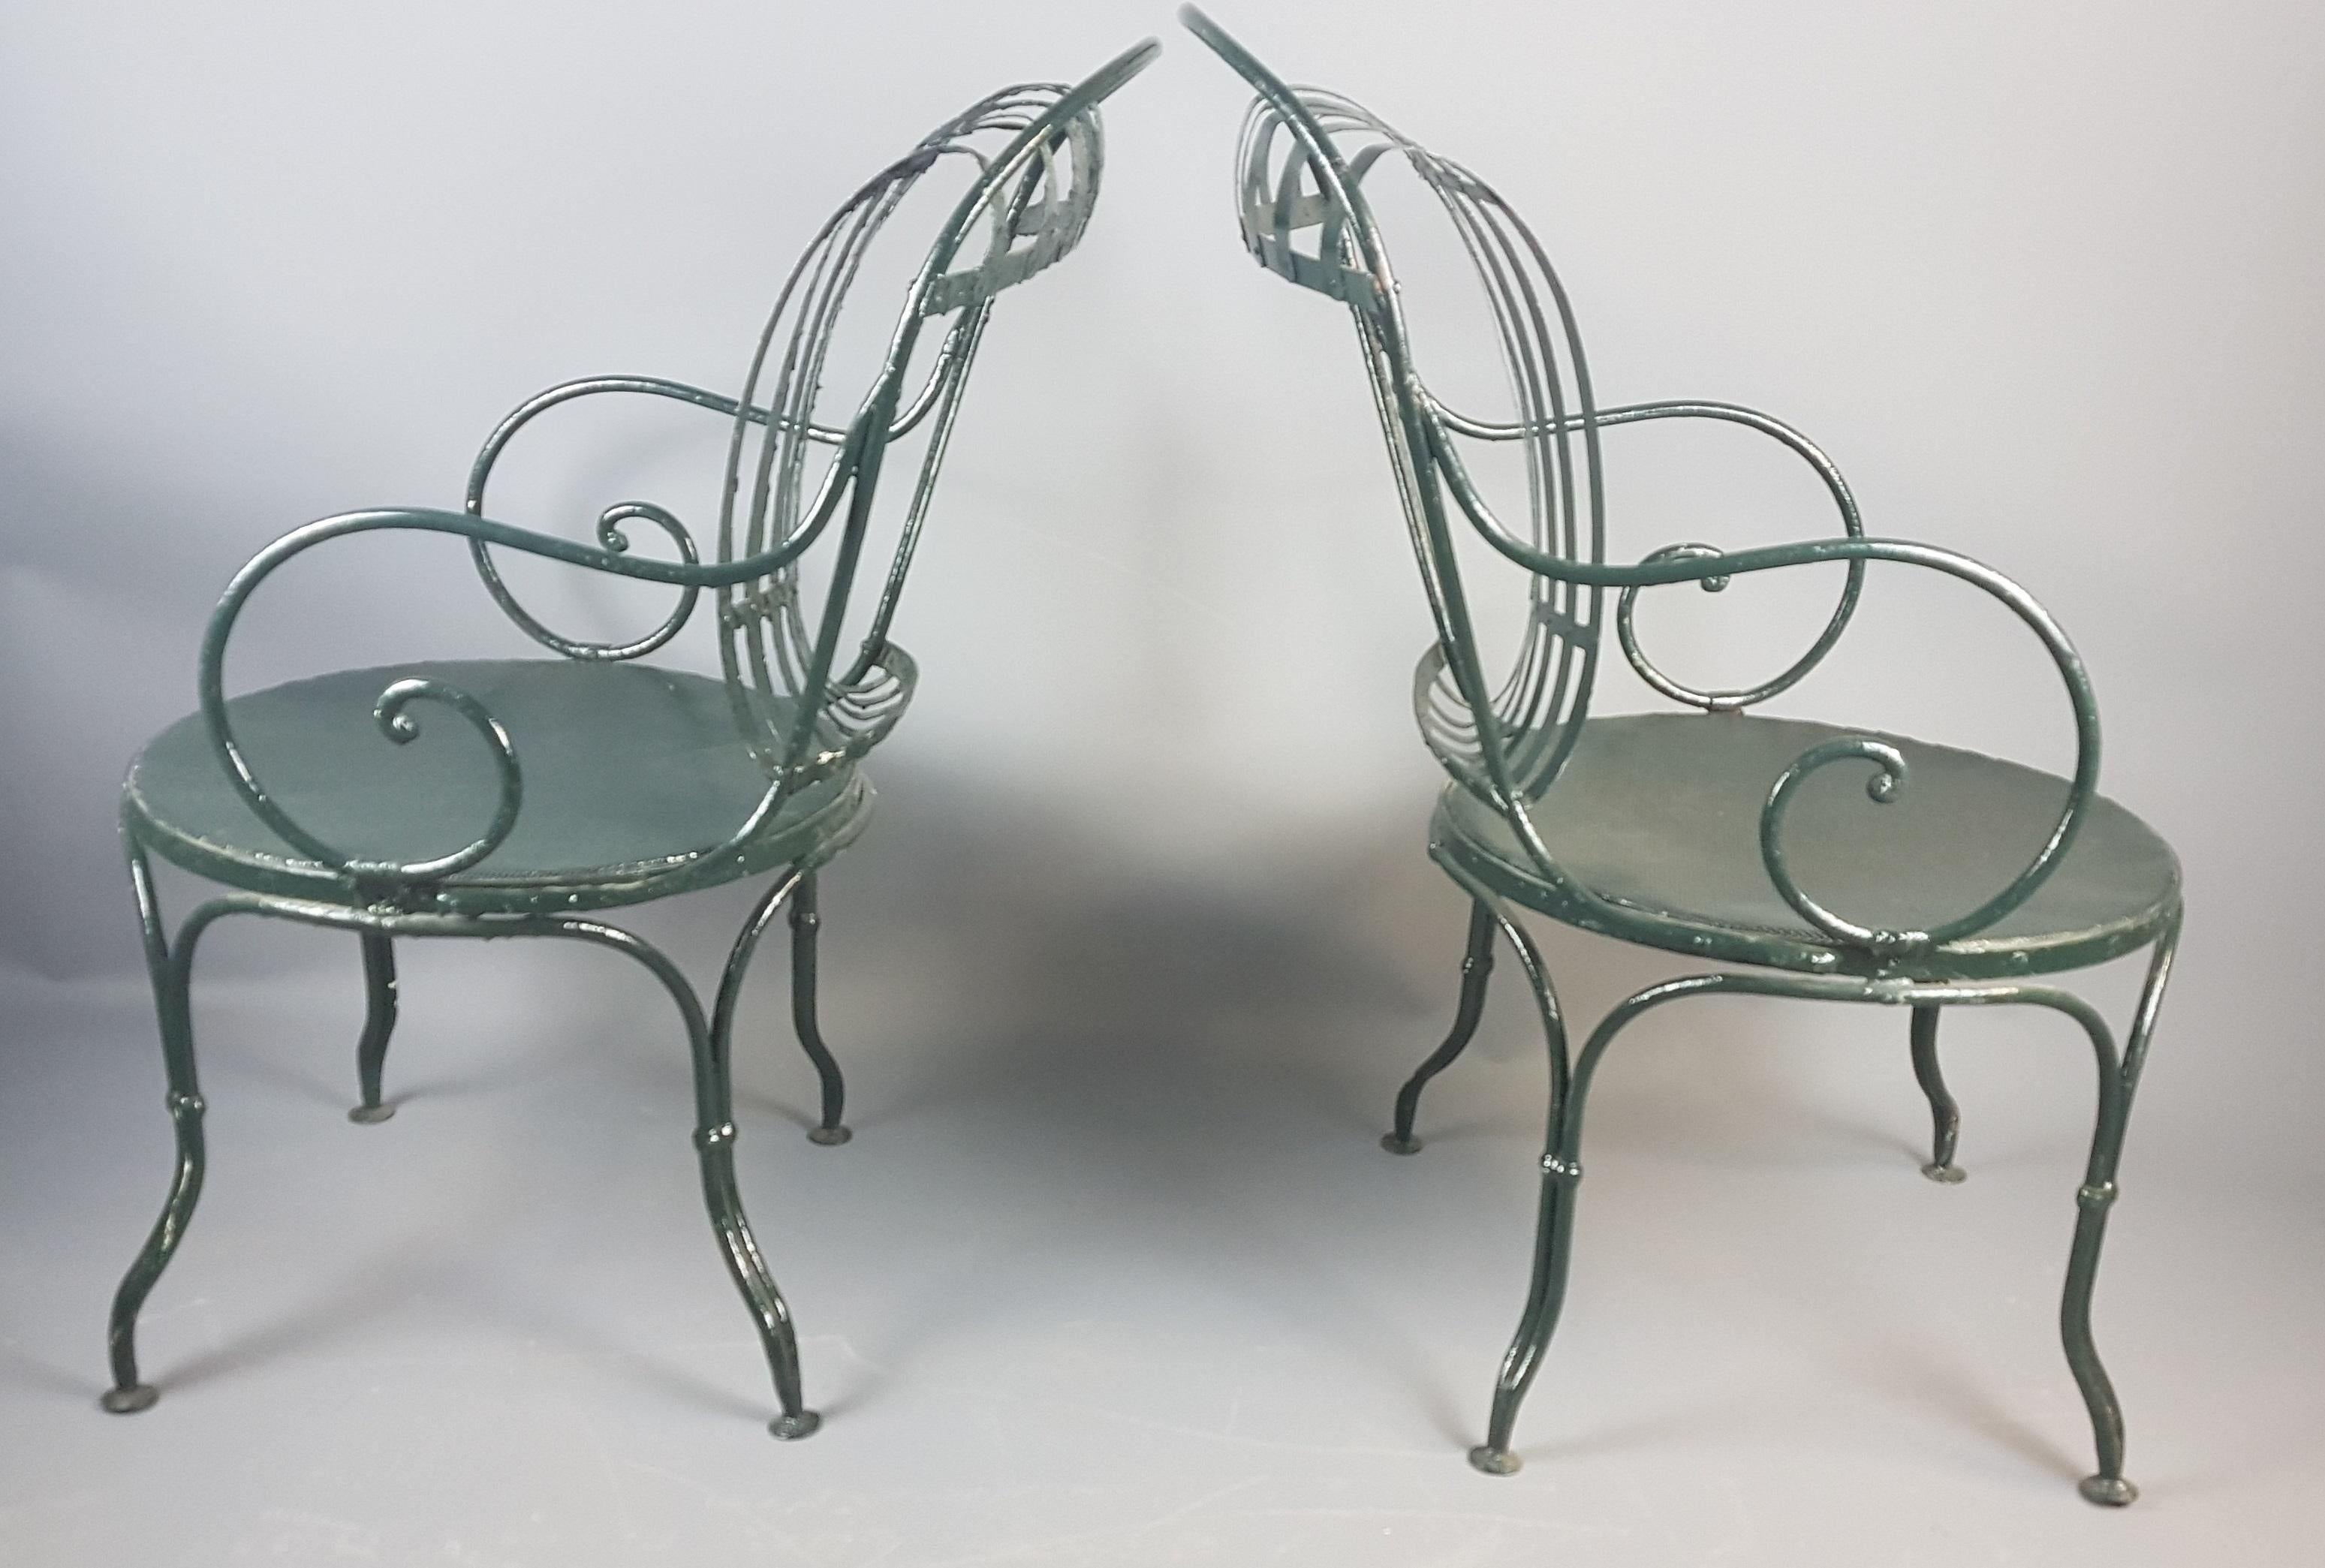 Metalwork Pair of Green Francois Carre Chairs Designed by Le Corbusier For Sale